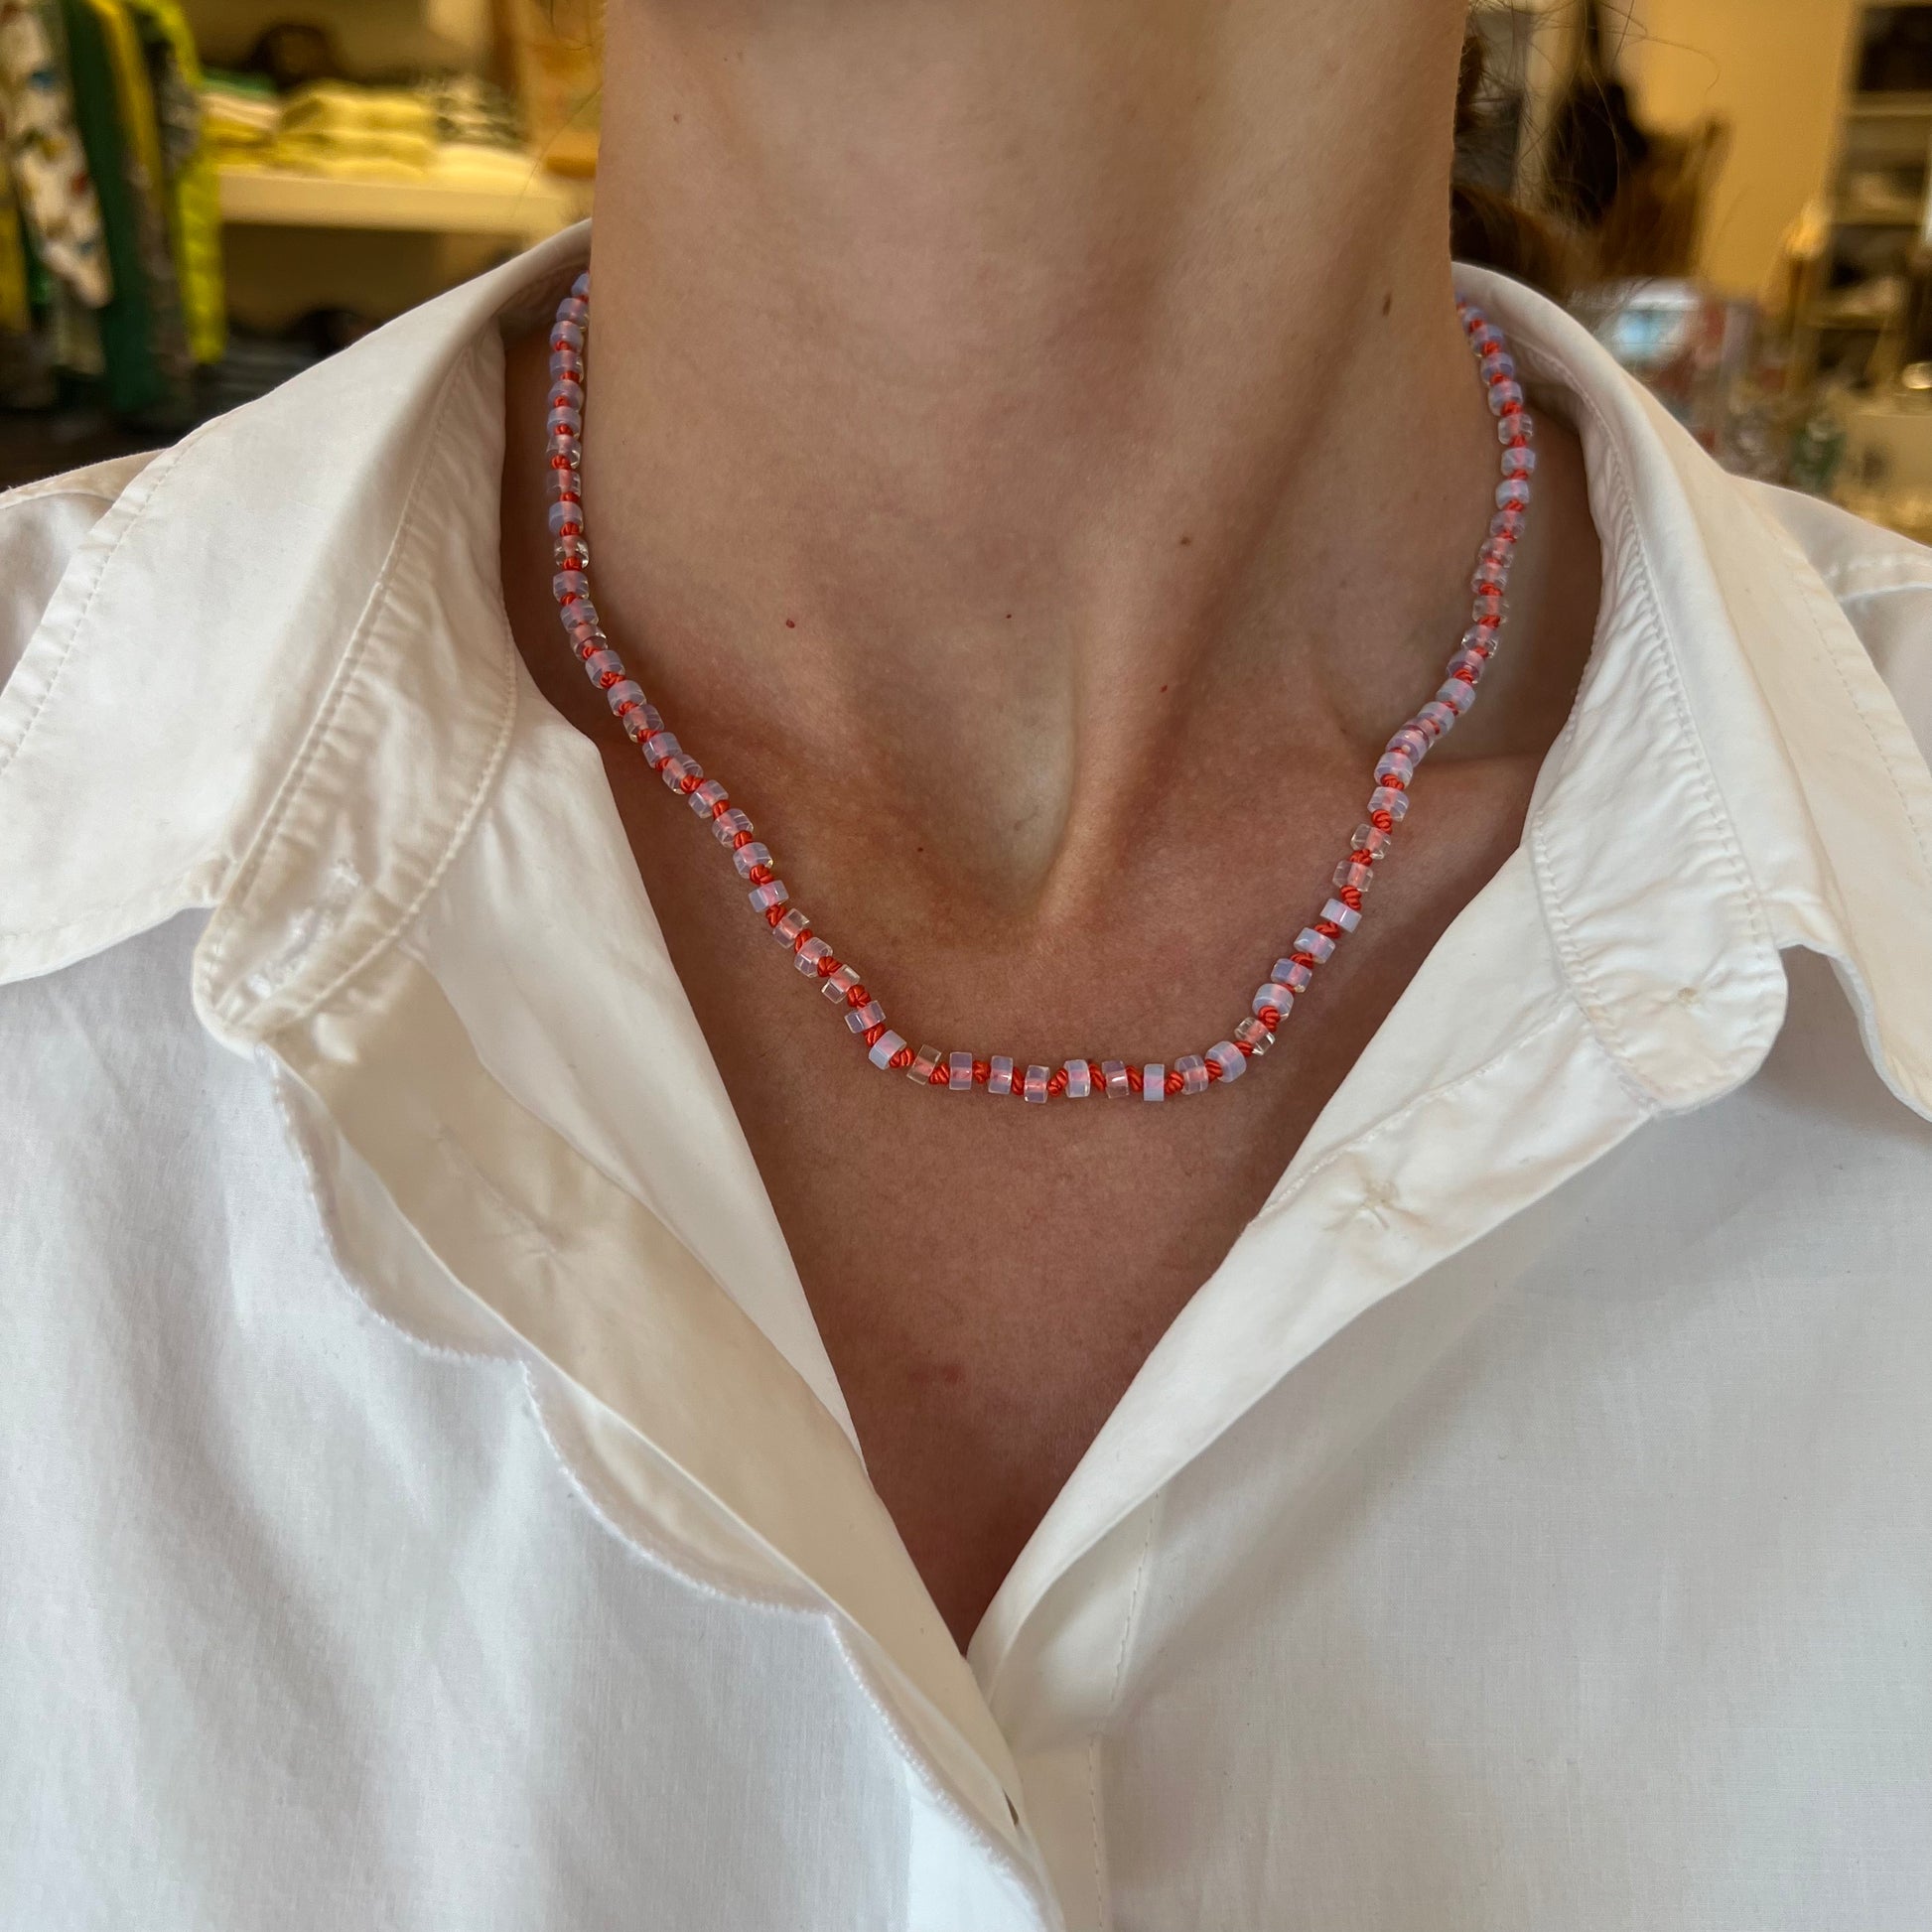 Pink and White Beaded Necklace